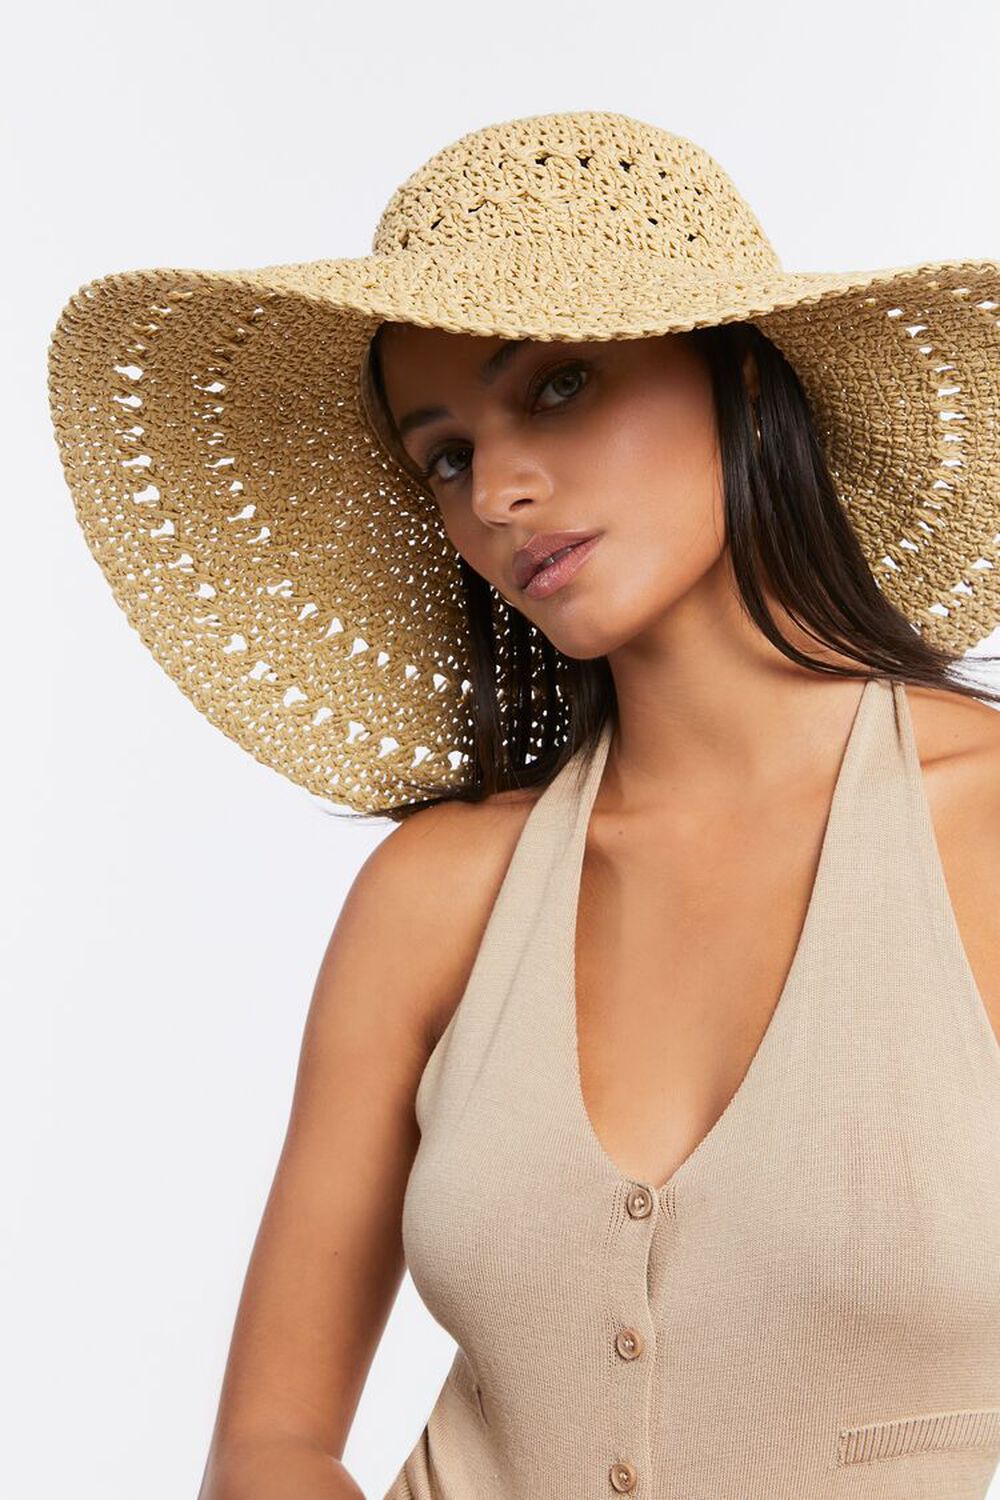 NATURAL Basketwoven Straw Sun Hat, image 1